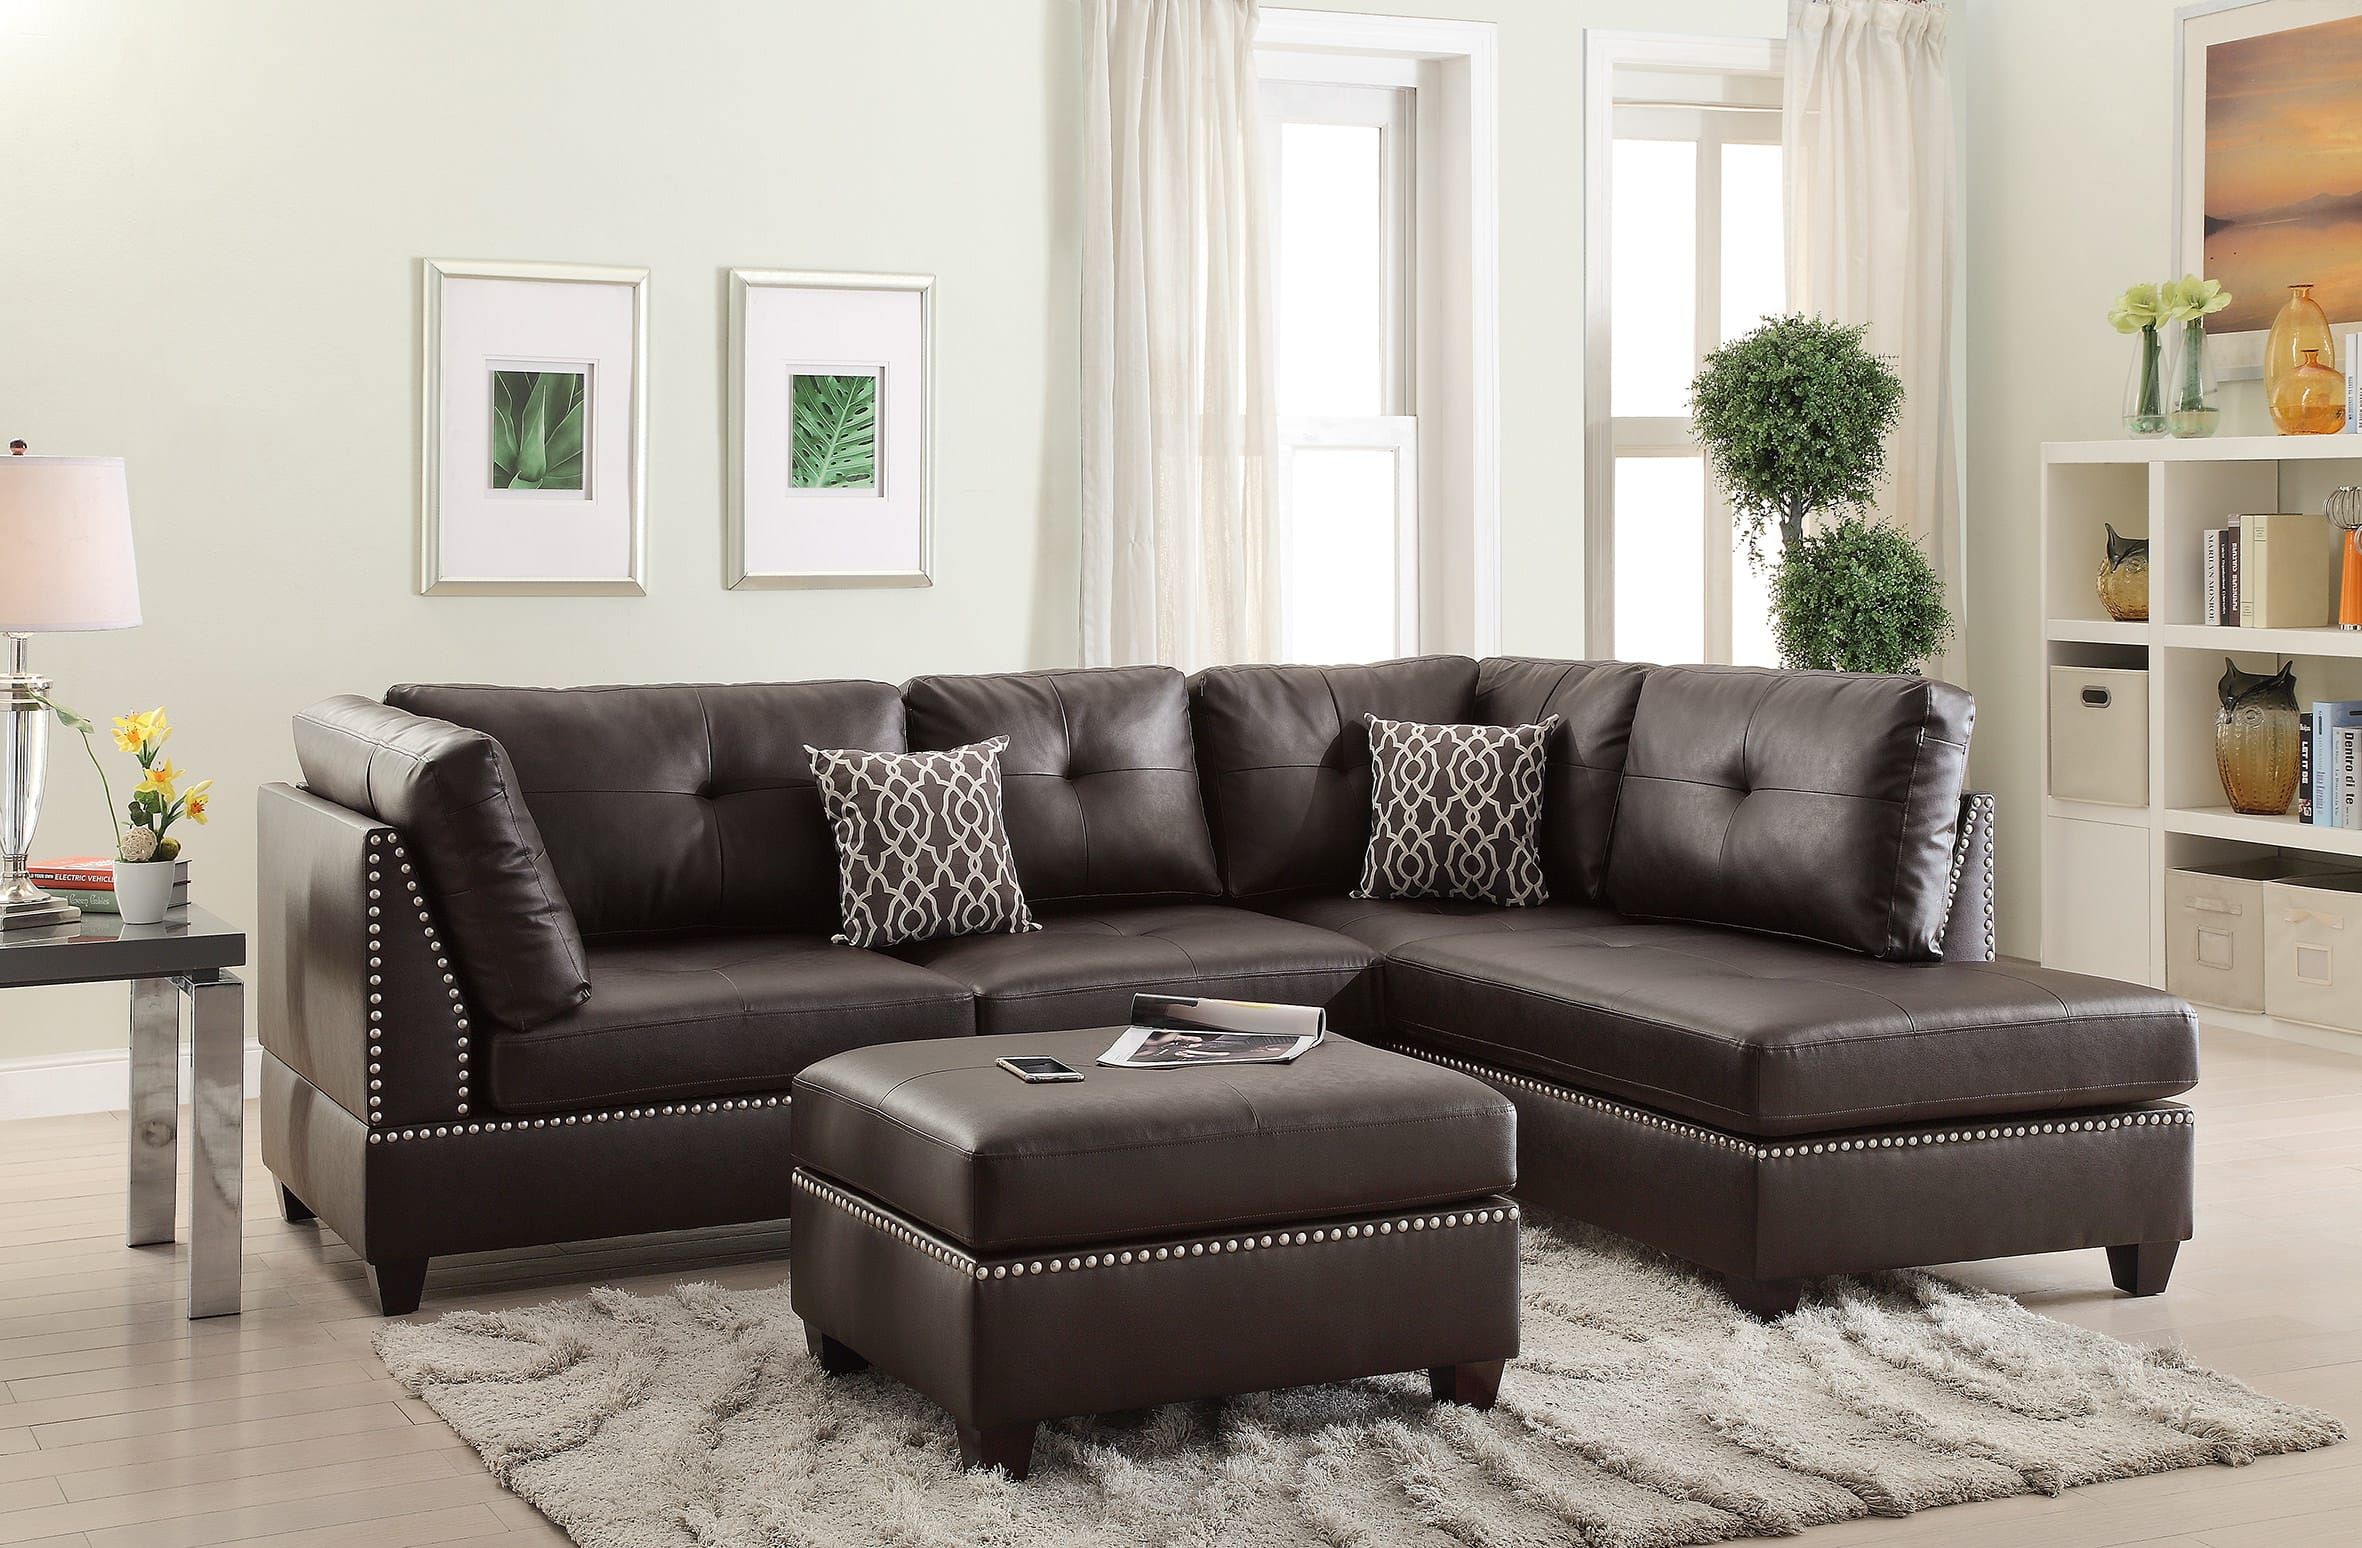 F6973 Espresso 3 Pcs Sectional Sofa Setpoundex Within 3 Piece Leather Sectional Sofa Sets (View 7 of 15)